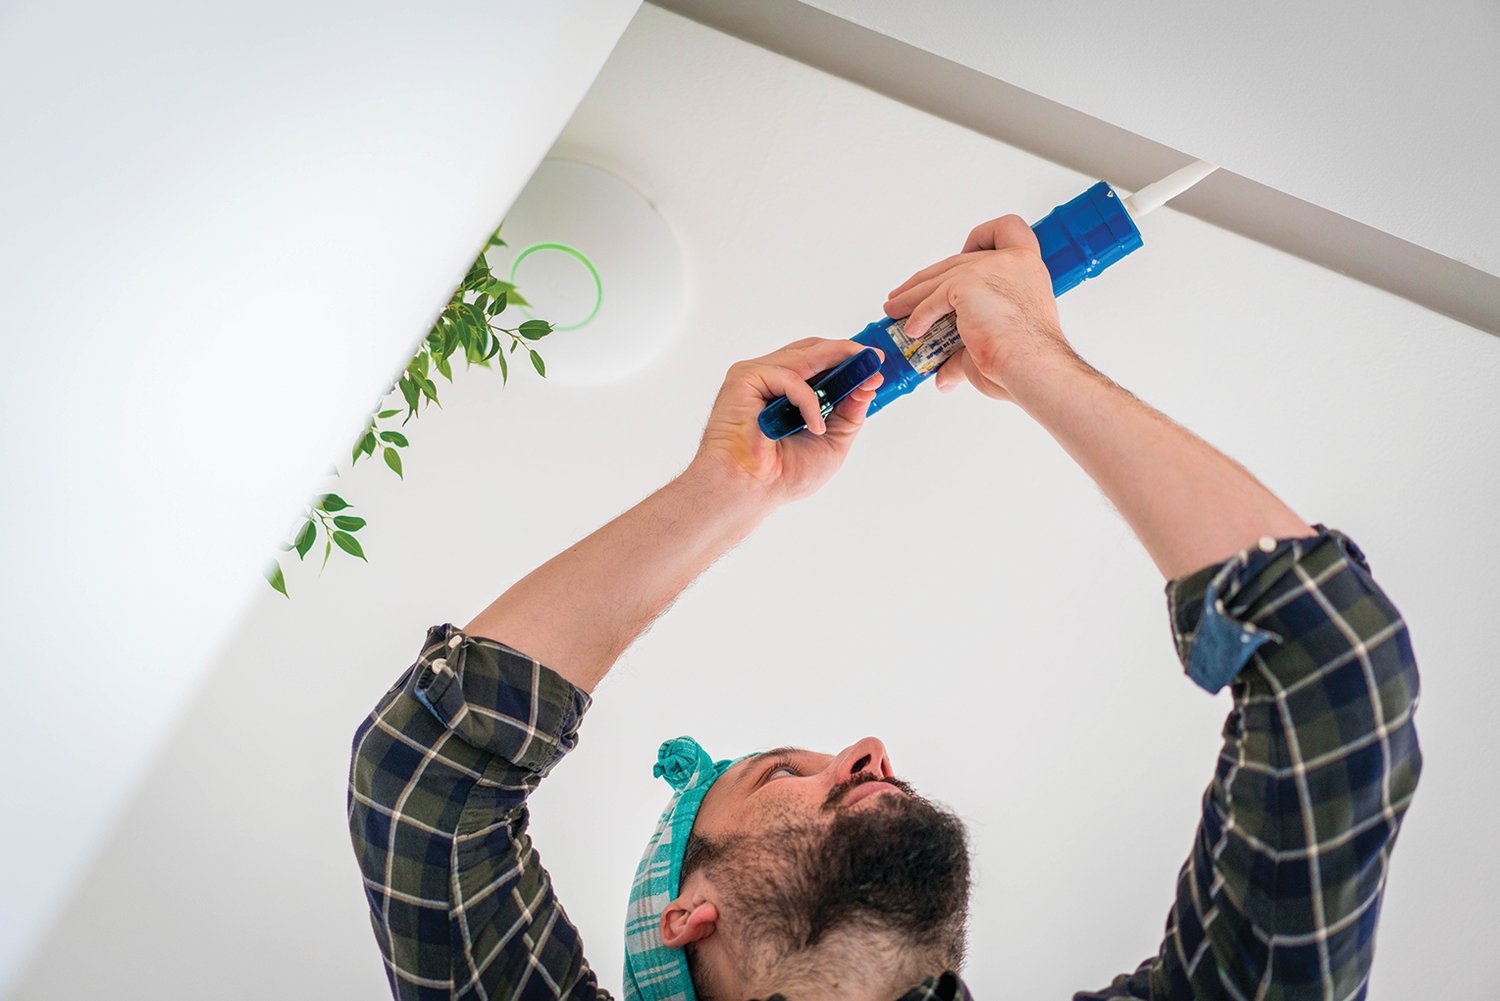 Applying caulk to ceiling fixtures of a home is a good way to stop less obvious leaks.